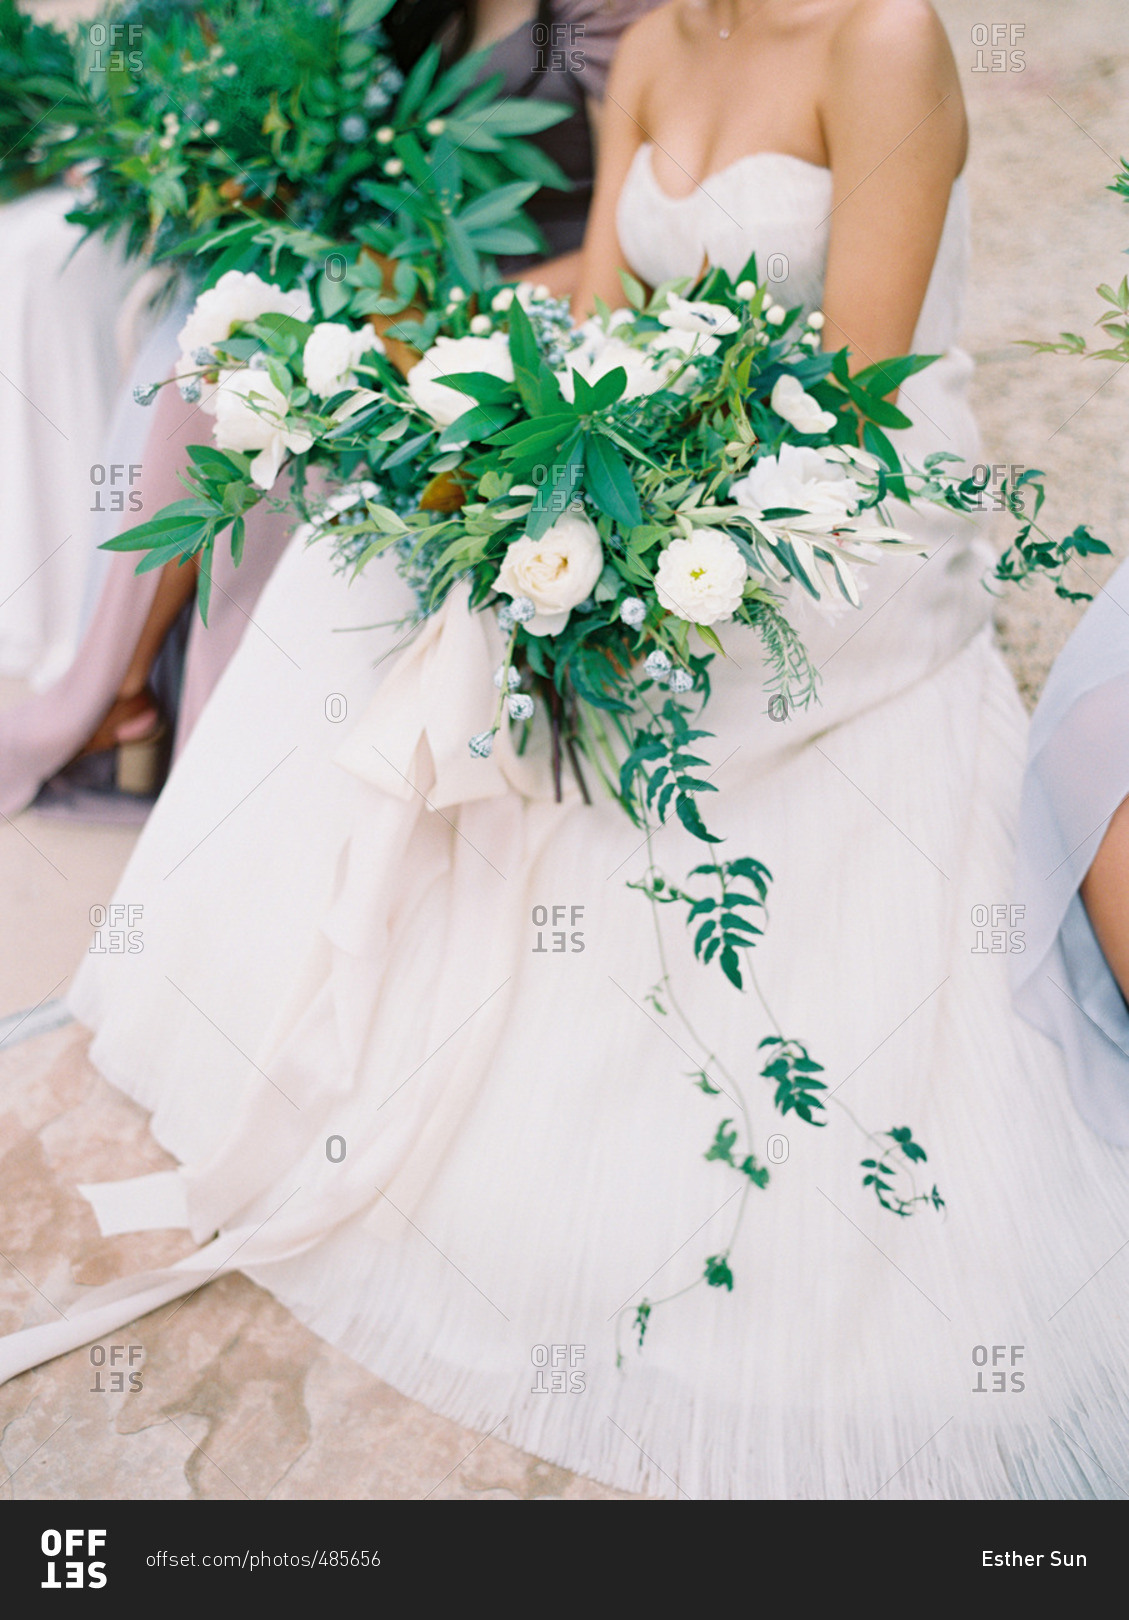 Neck down portrait of seated bride with white and green floral bouquet